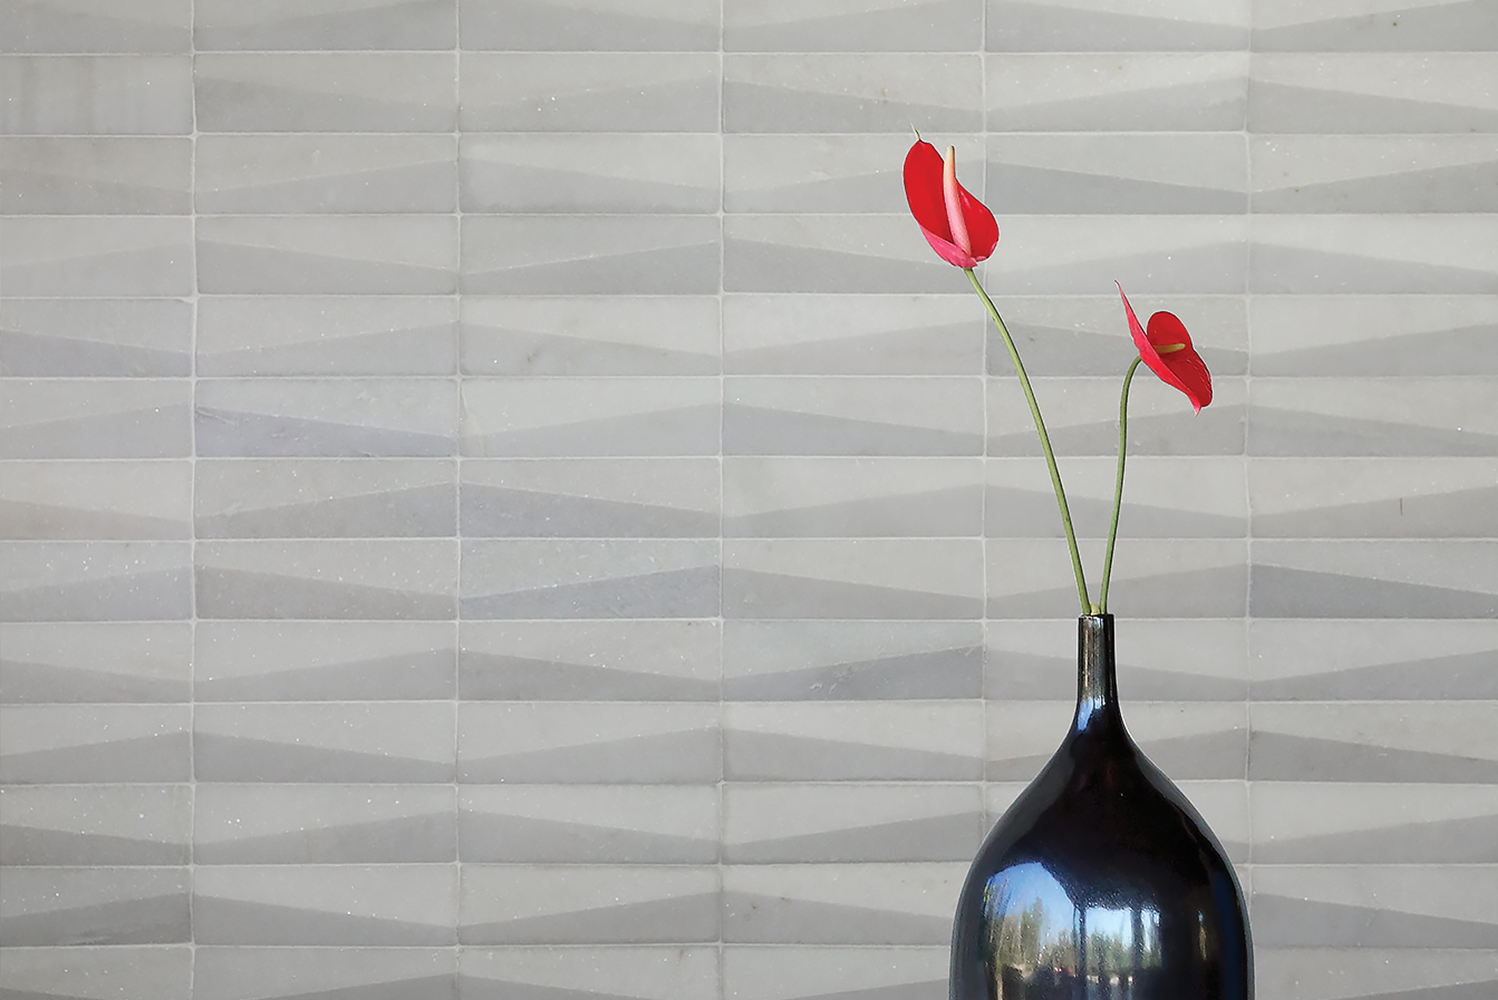 Island Stone introduced the Dunes series of subway tiles which were sculpted with an offset angled surface forming a flow o